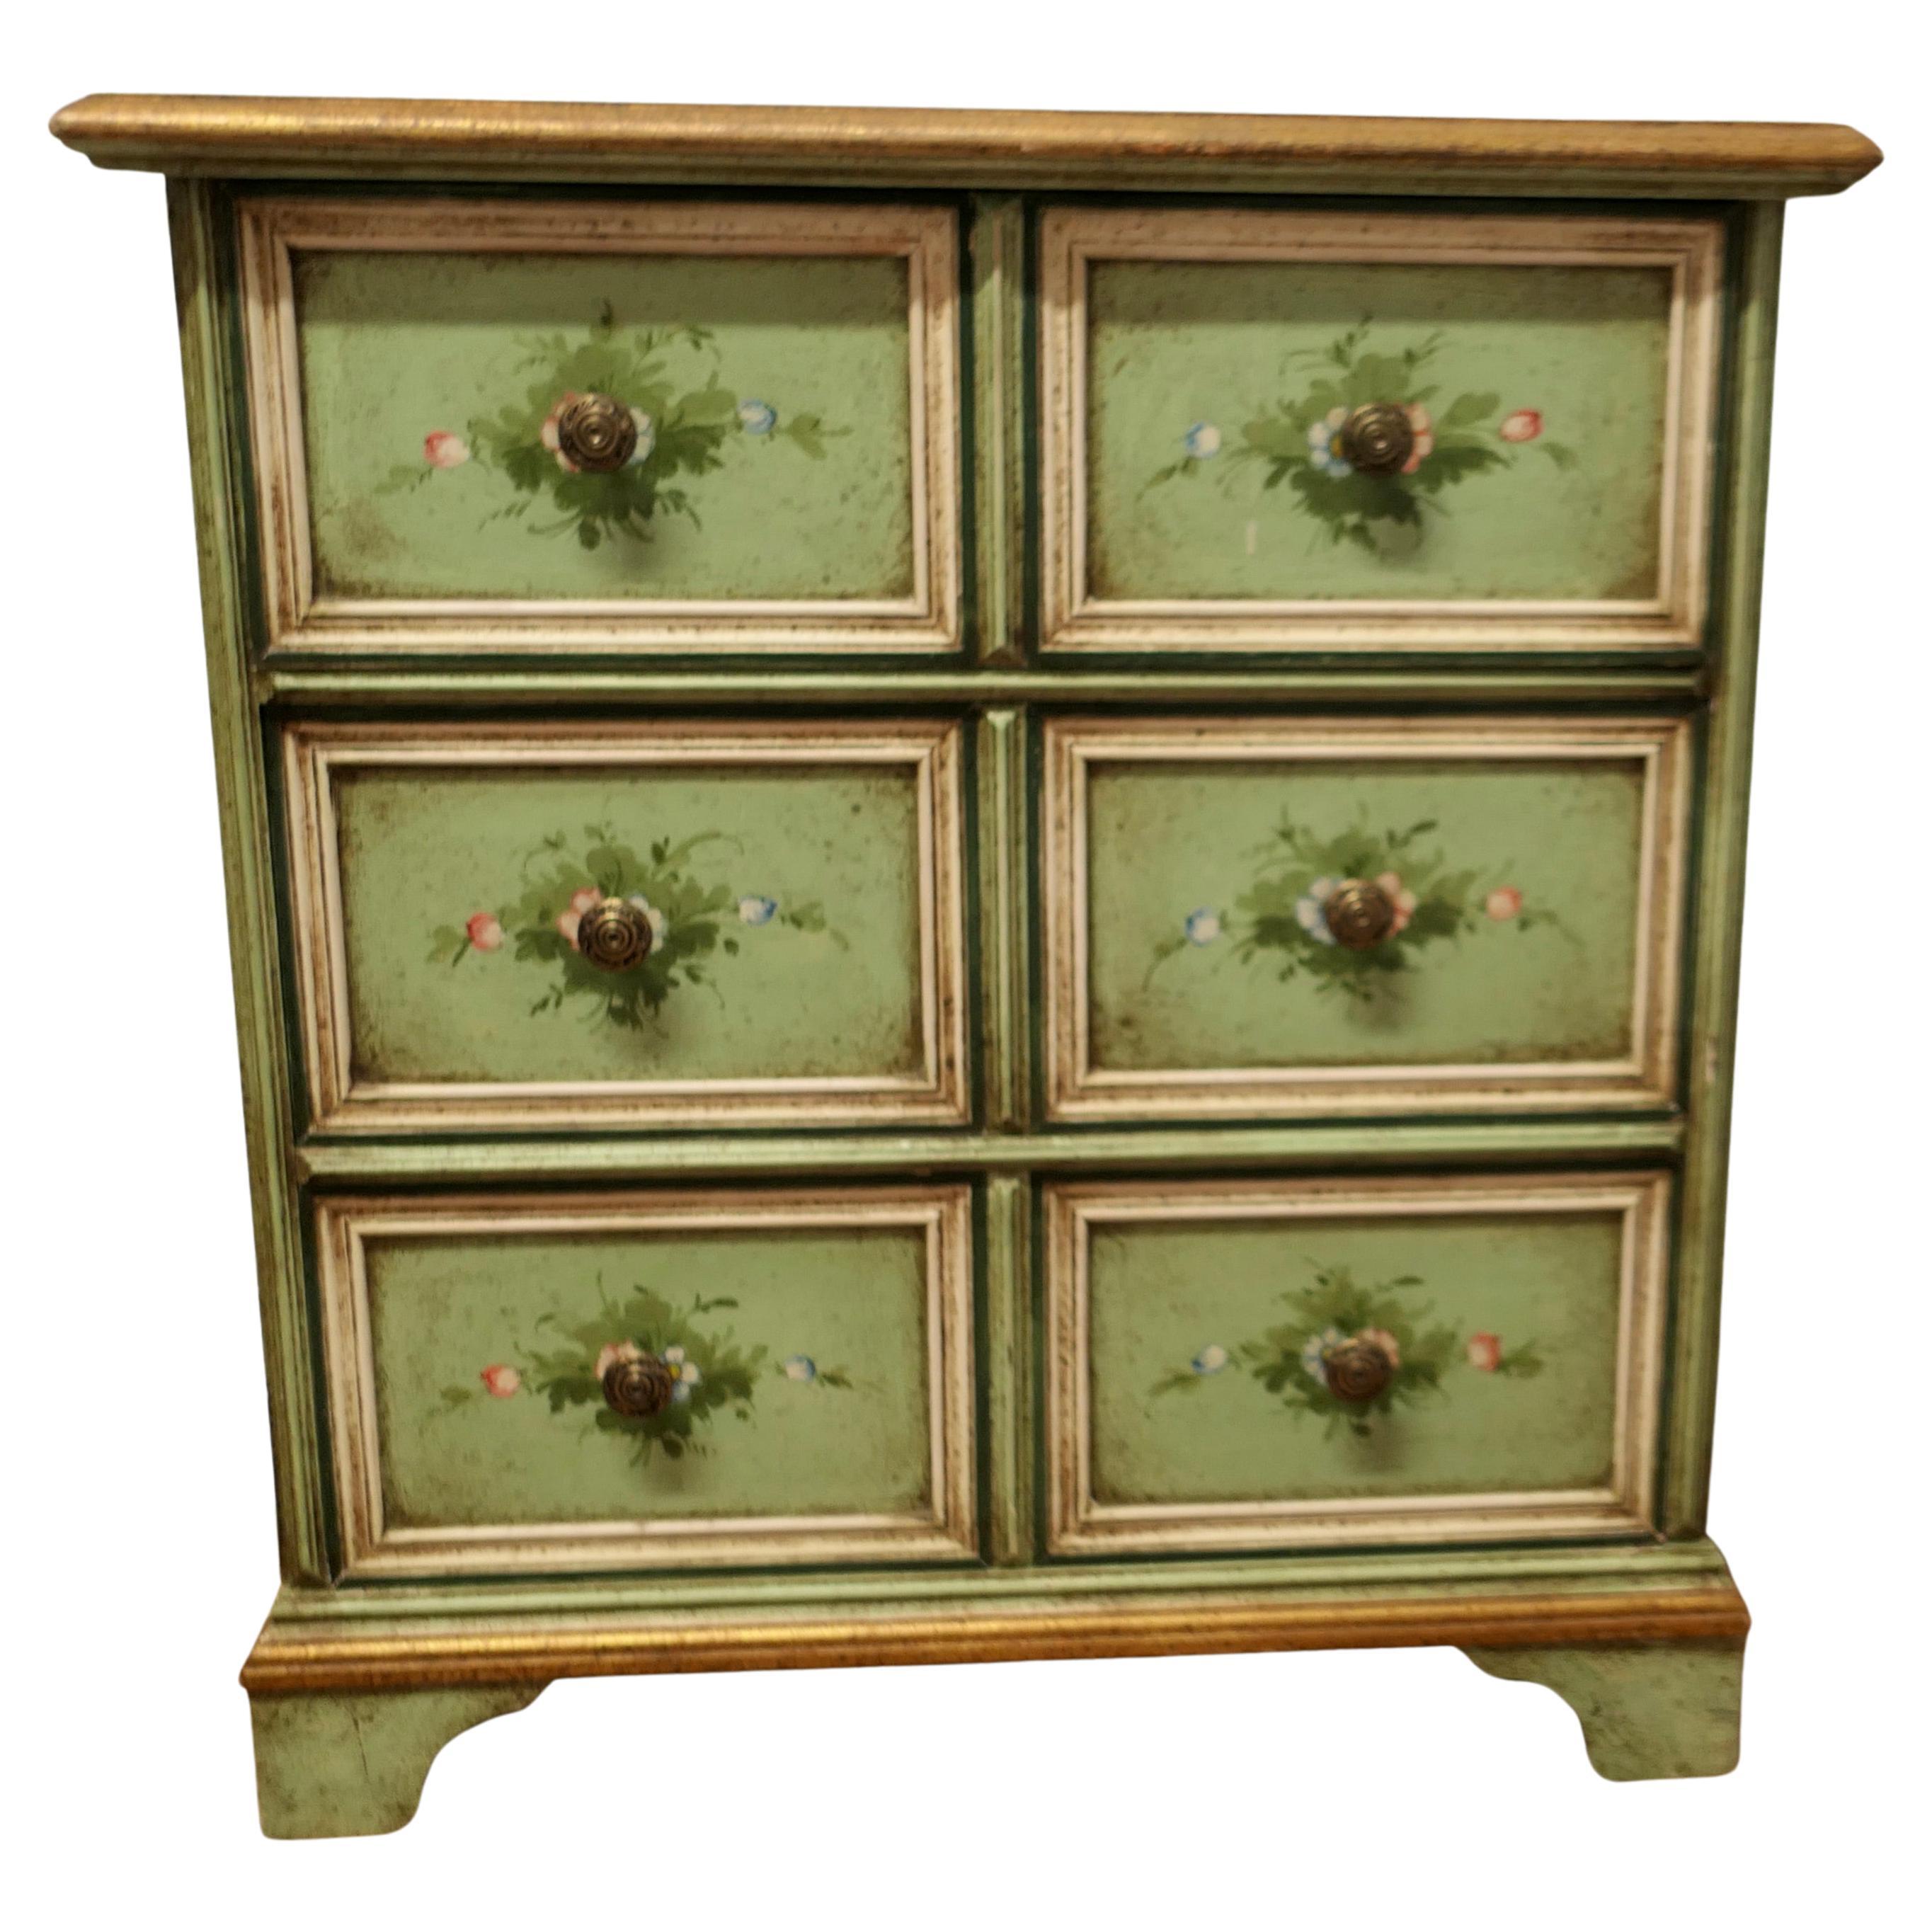 Original Shabby Painted Chest of Drawers This Delightful 3 Drawer Chest For Sale